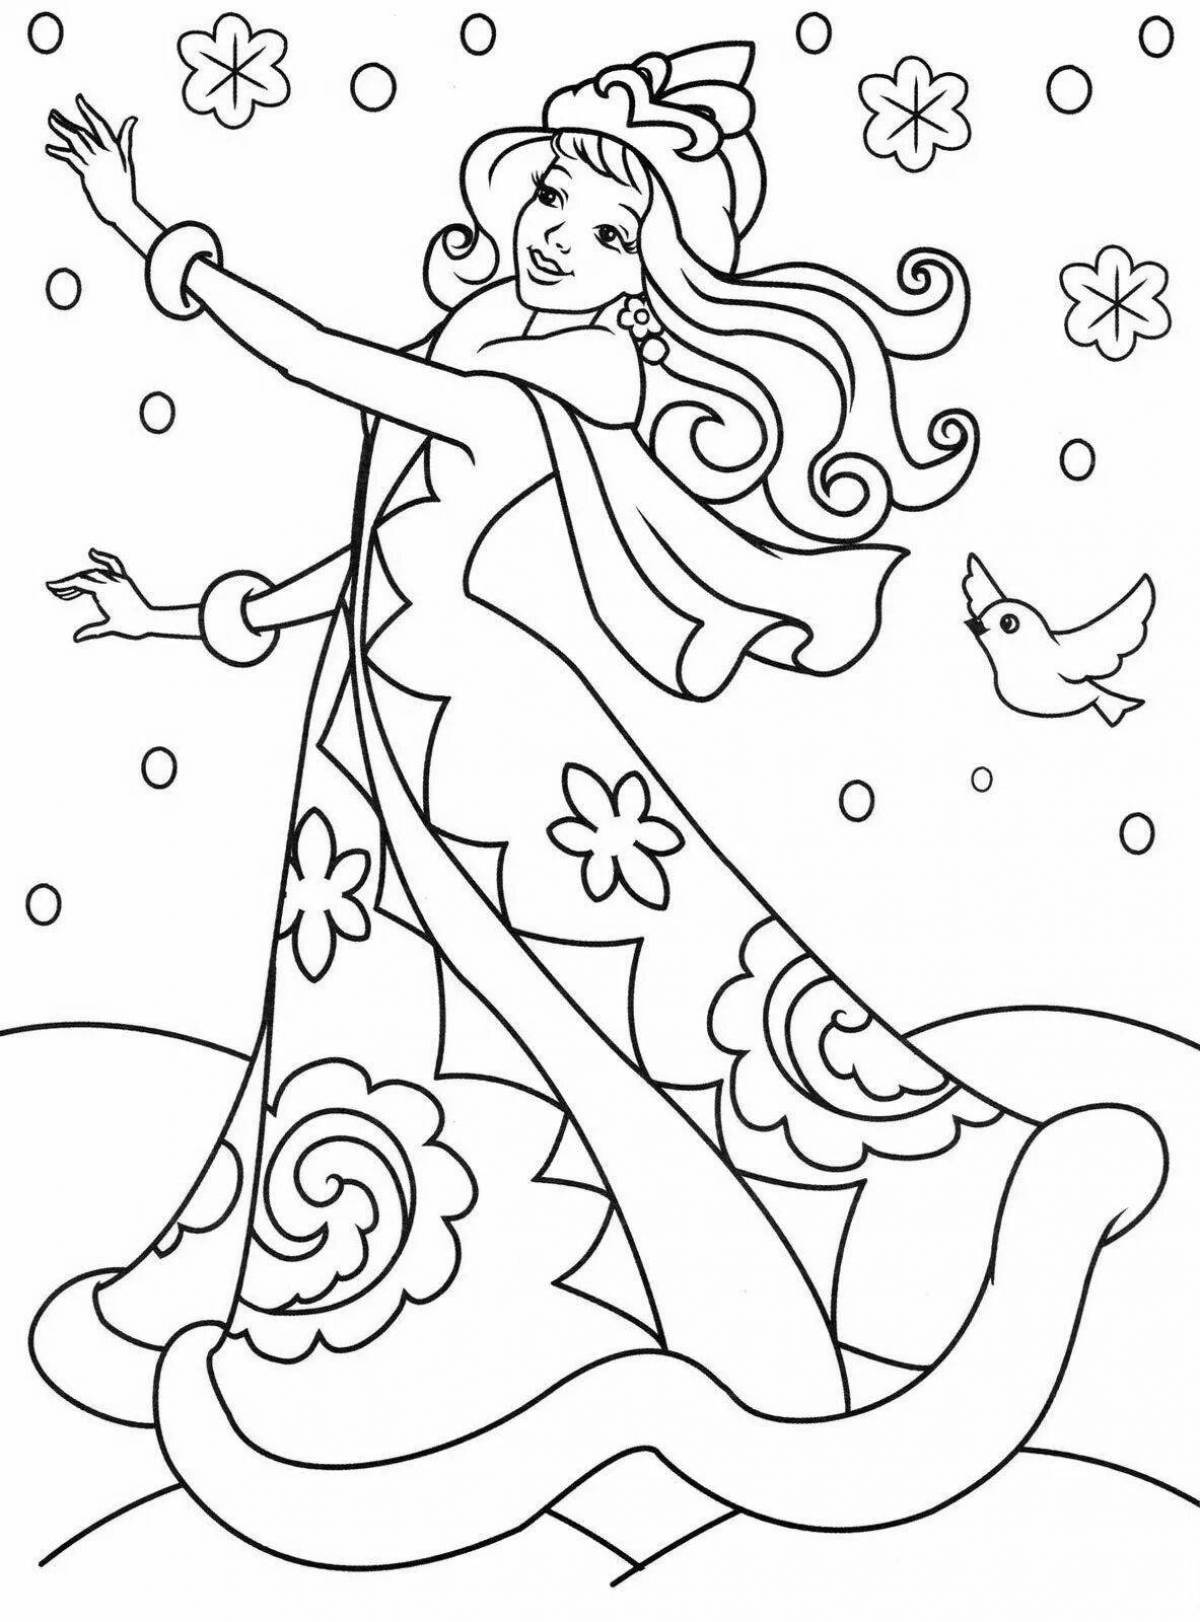 Serene snow maiden coloring book for kids